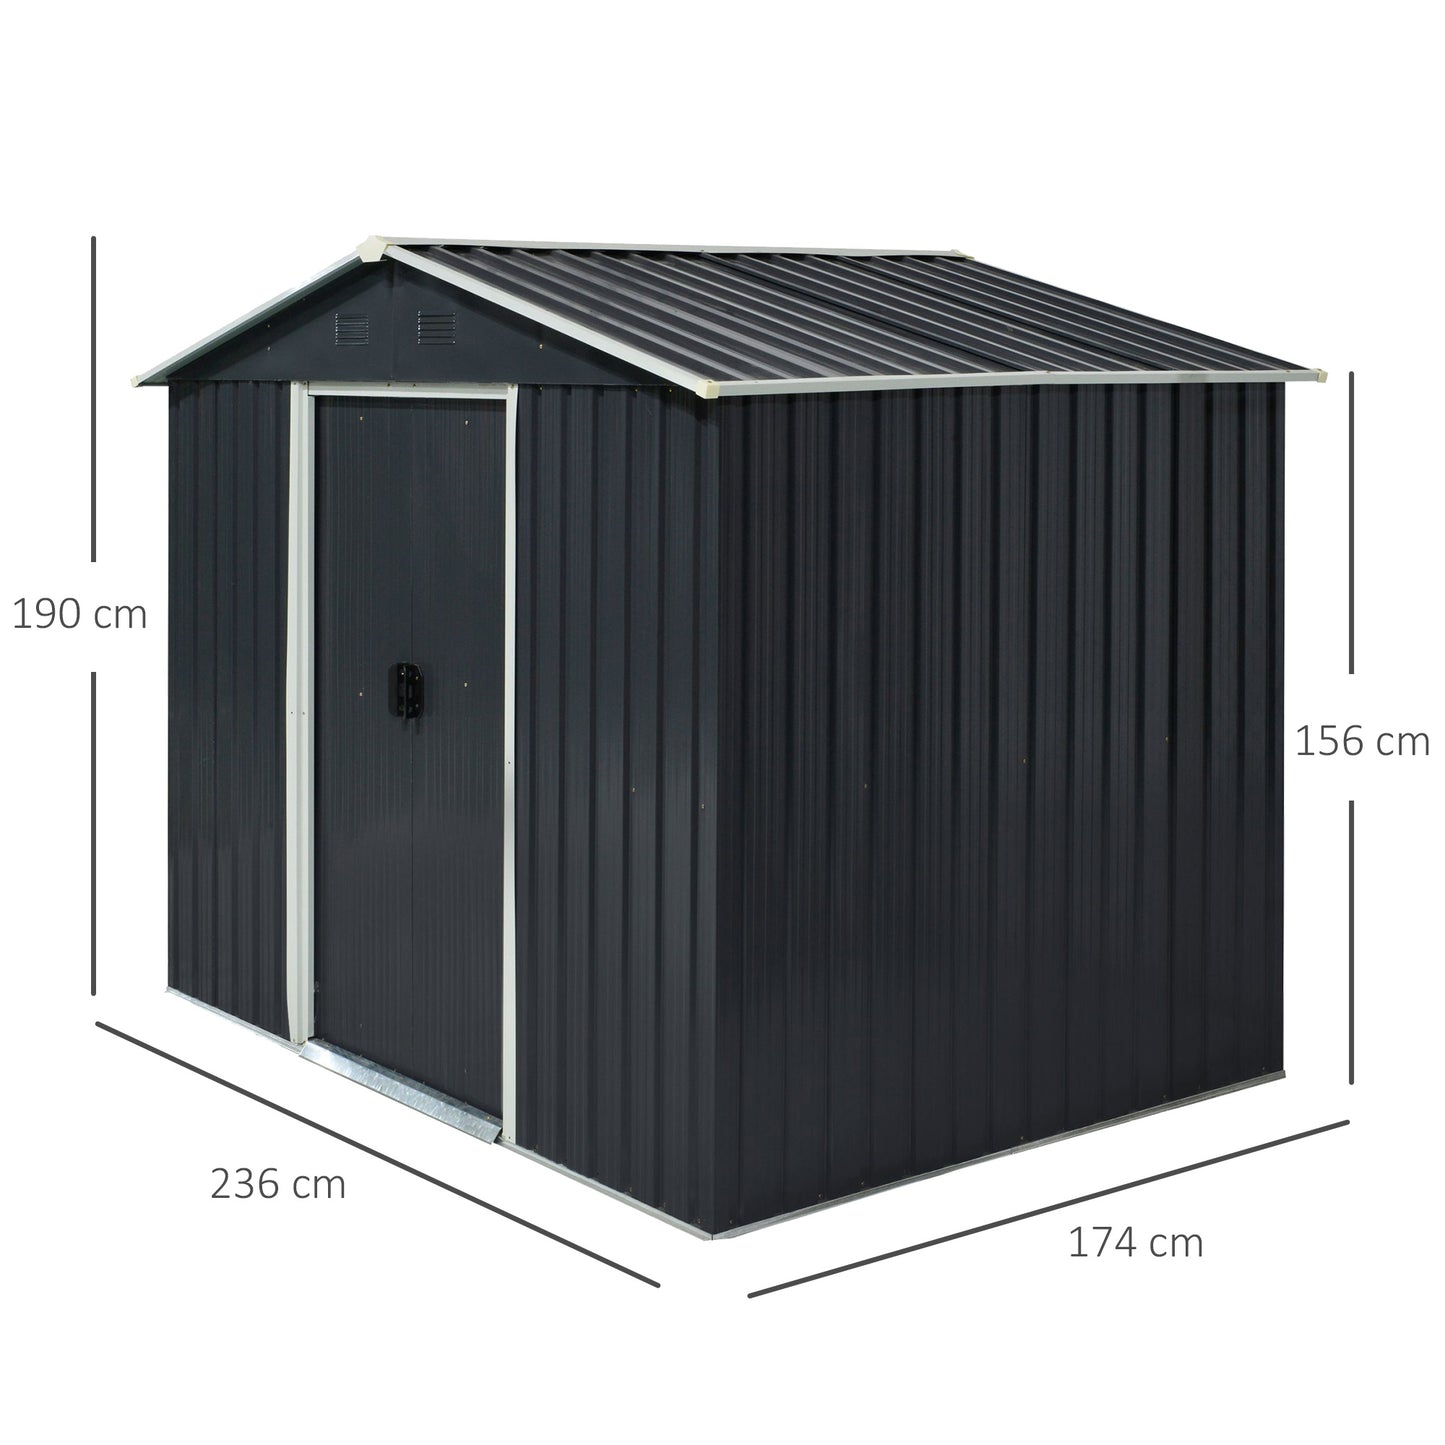 Outsunny 5.7 x 7.7ft Corrugated Steel Sliding Door Garden Shed - Grey